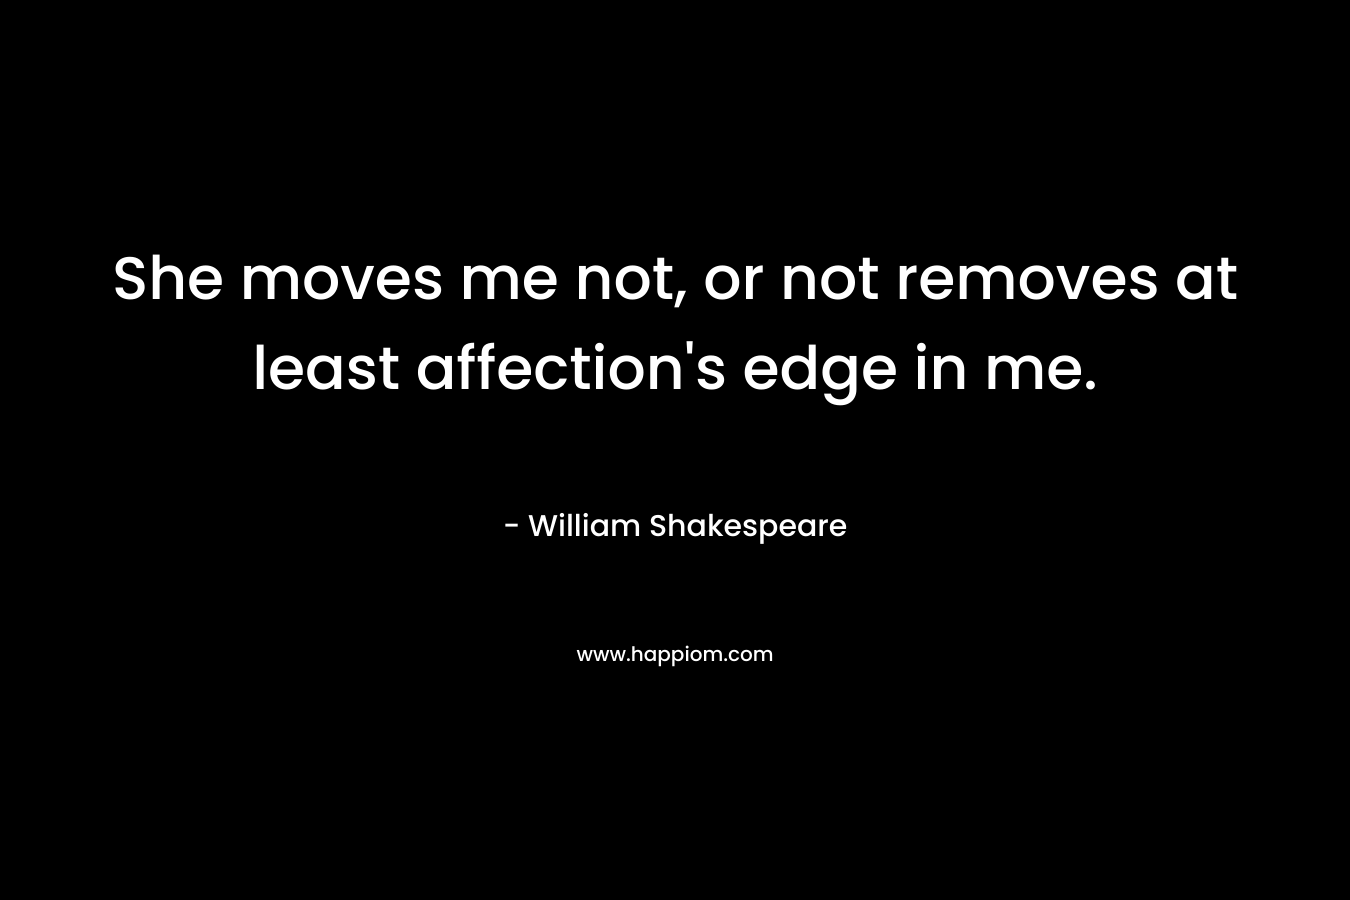 She moves me not, or not removes at least affection’s edge in me. – William Shakespeare